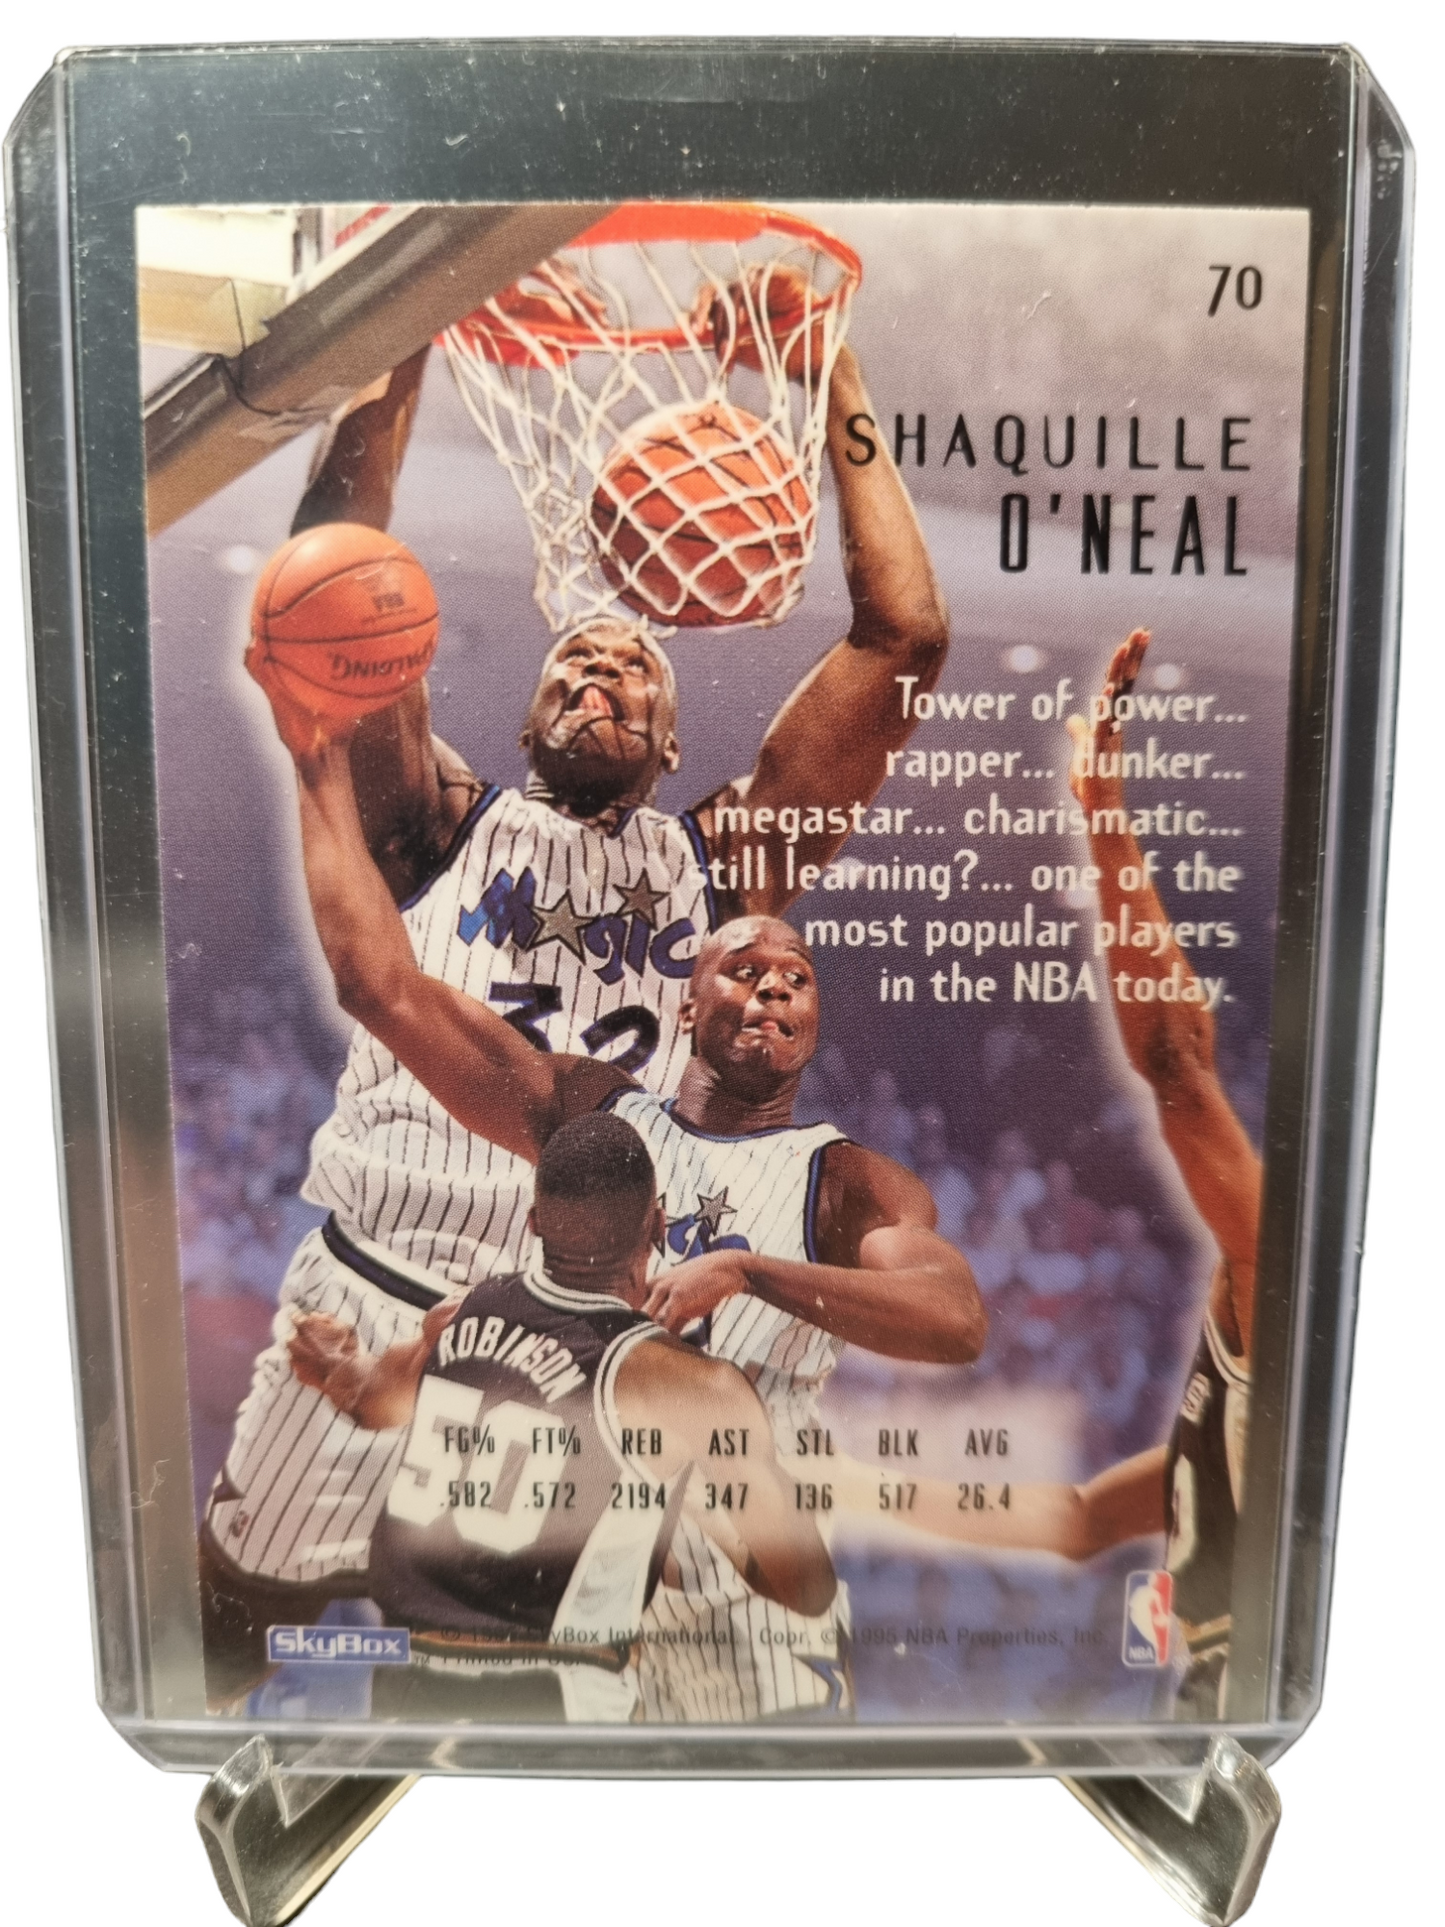 1996 Skybox #70 Shaquille O'Neal Emotion